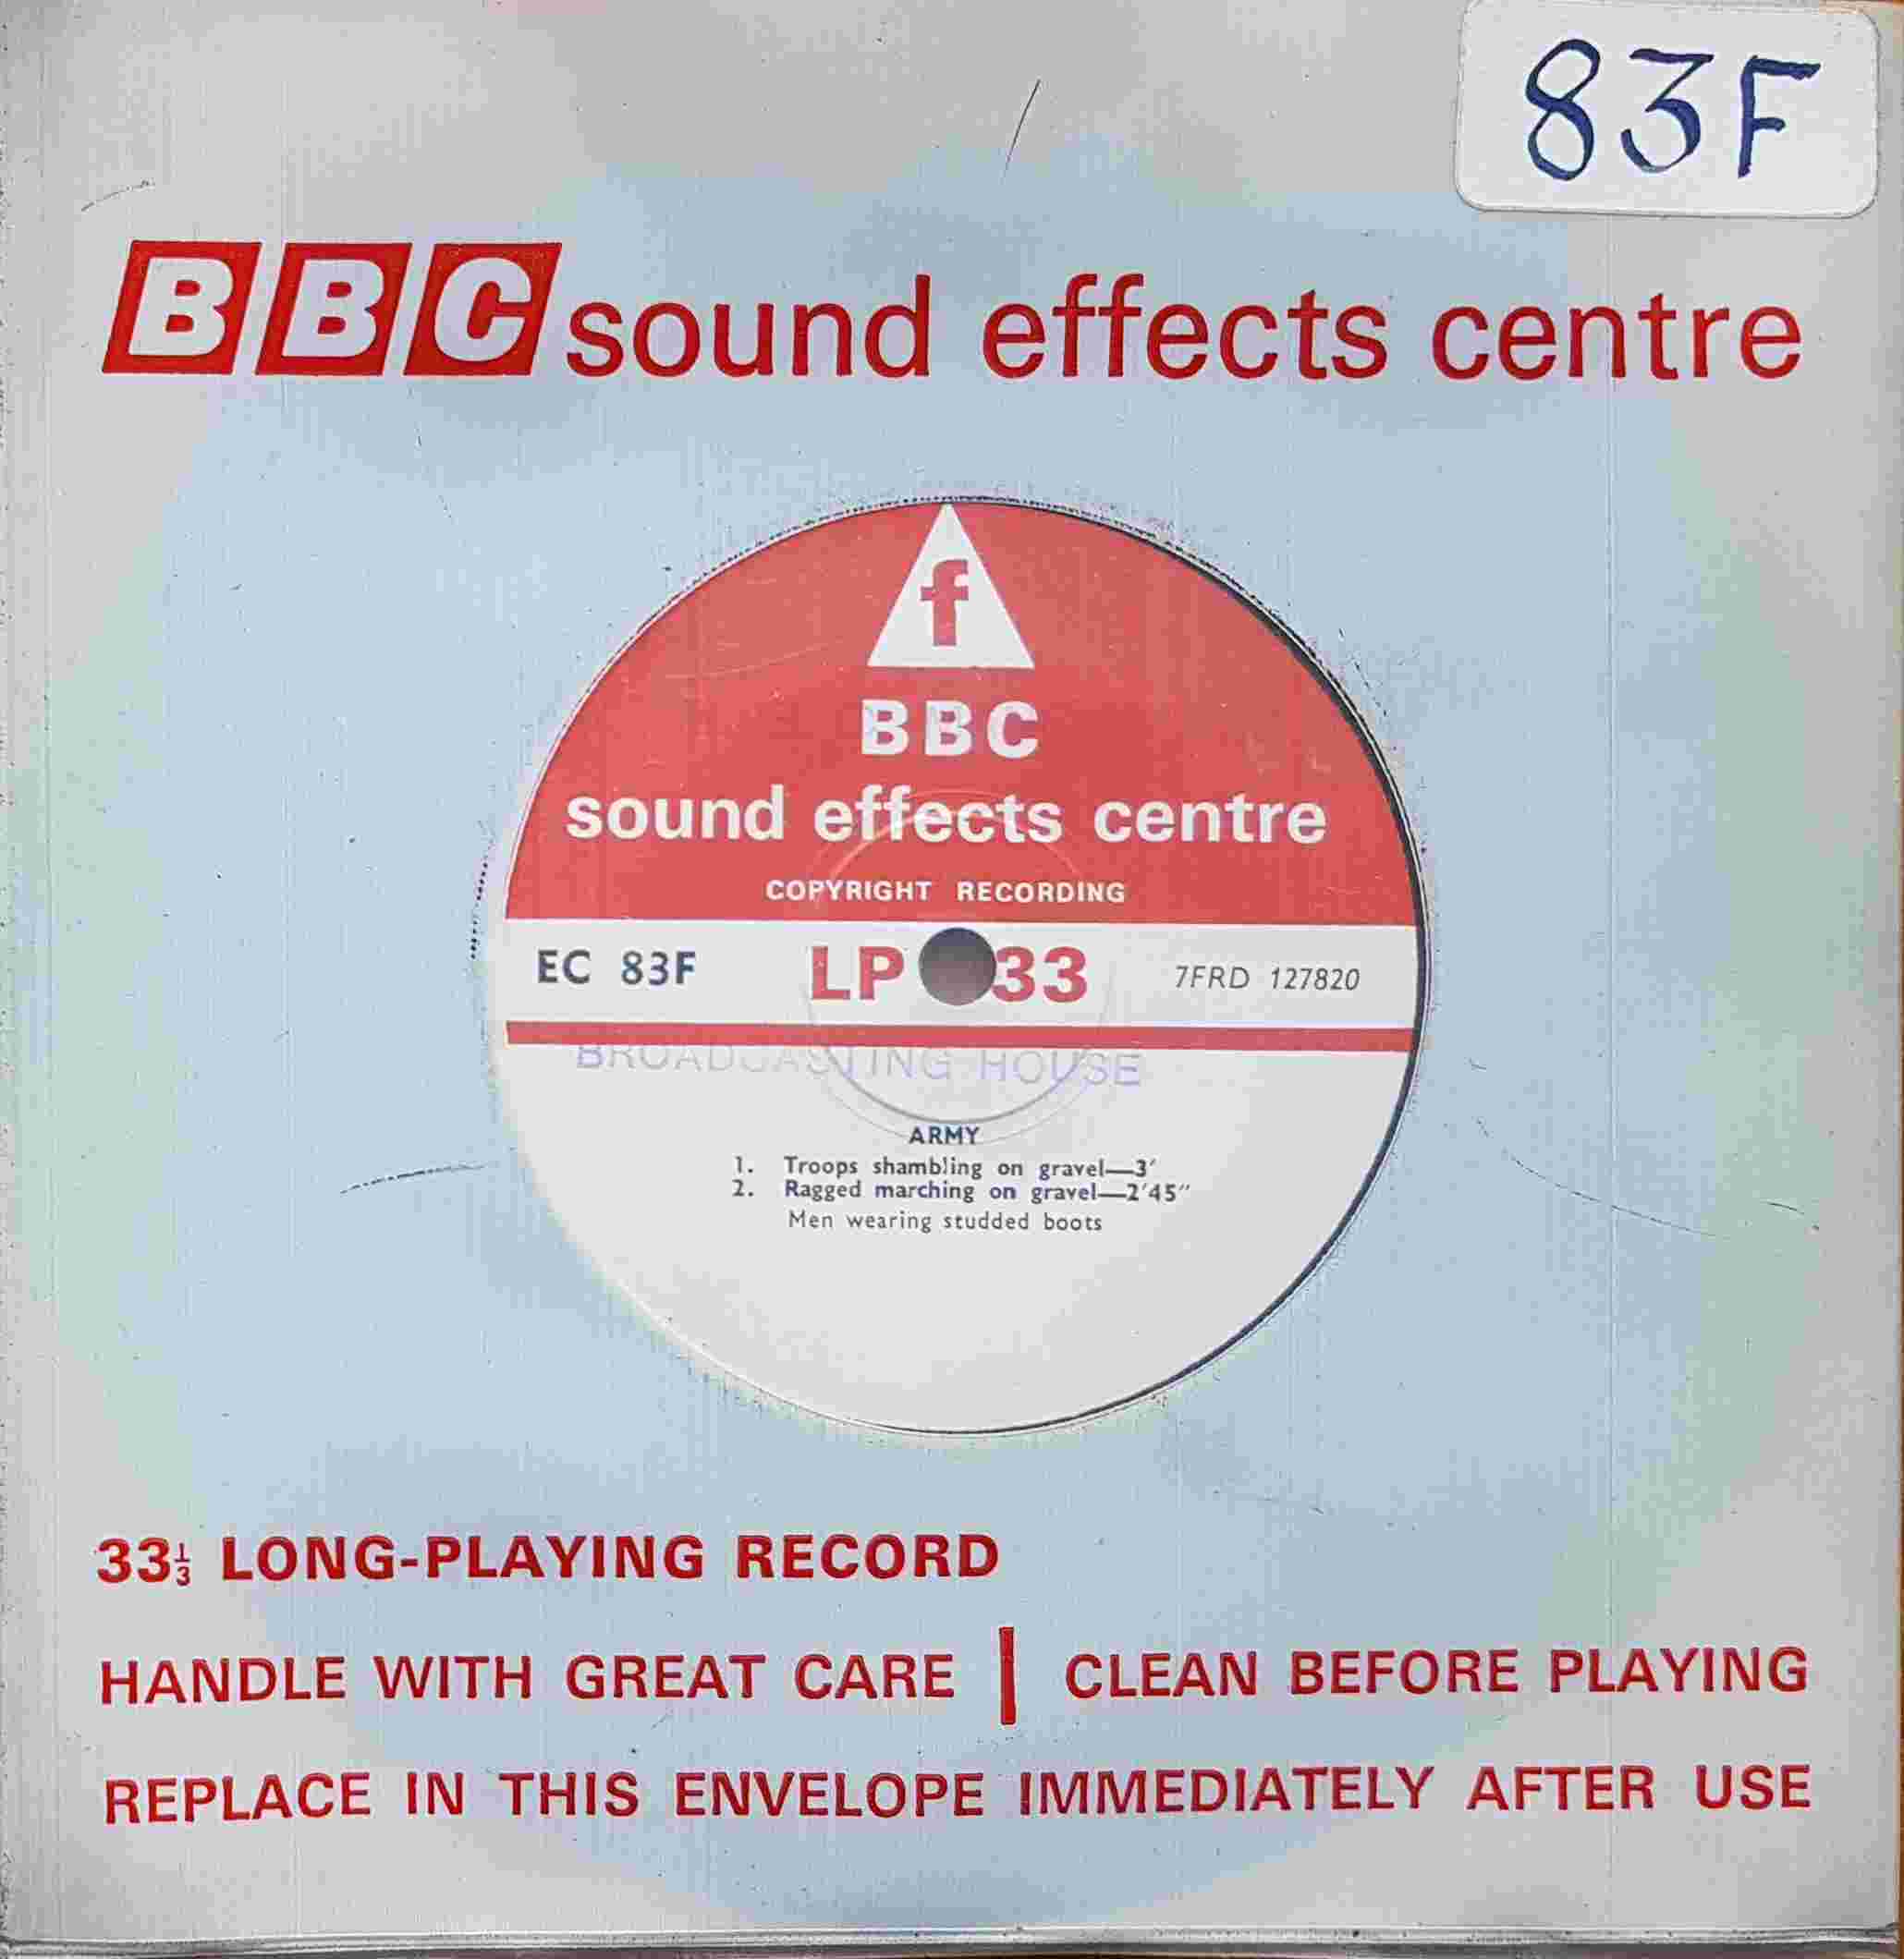 Picture of EC 83F Army (men wearing studded boots) by artist Not registered from the BBC singles - Records and Tapes library